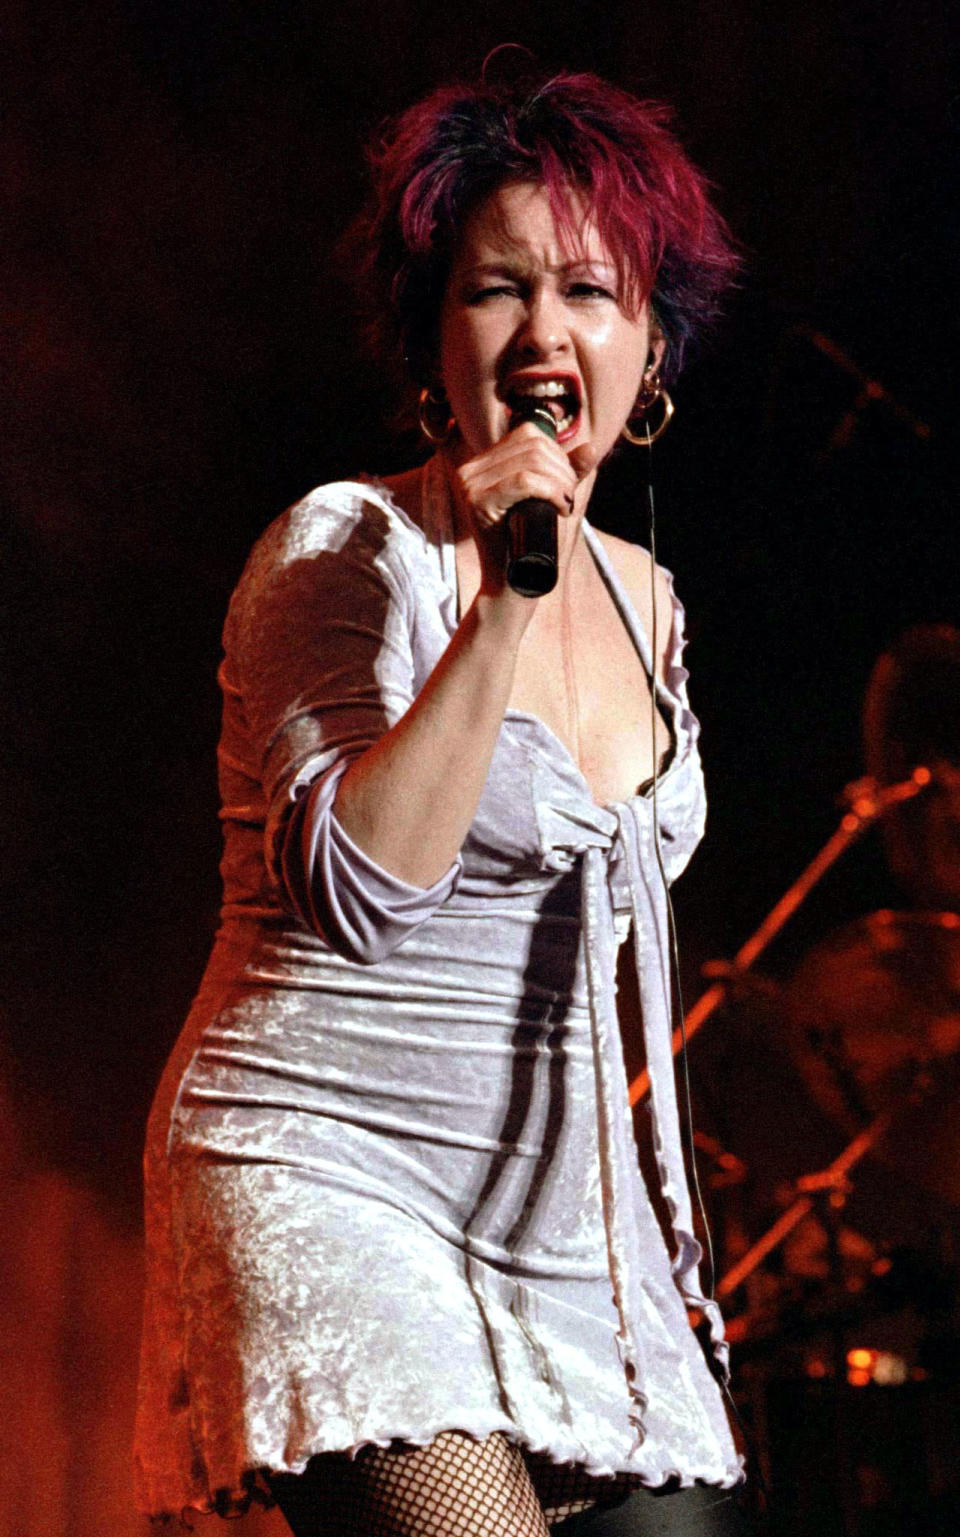 Singer Cyndi Lauper performs at the Greek Theatre, in Los Angeles as the opening act for Tina Turner's "Wildest Dreams Tour" concert